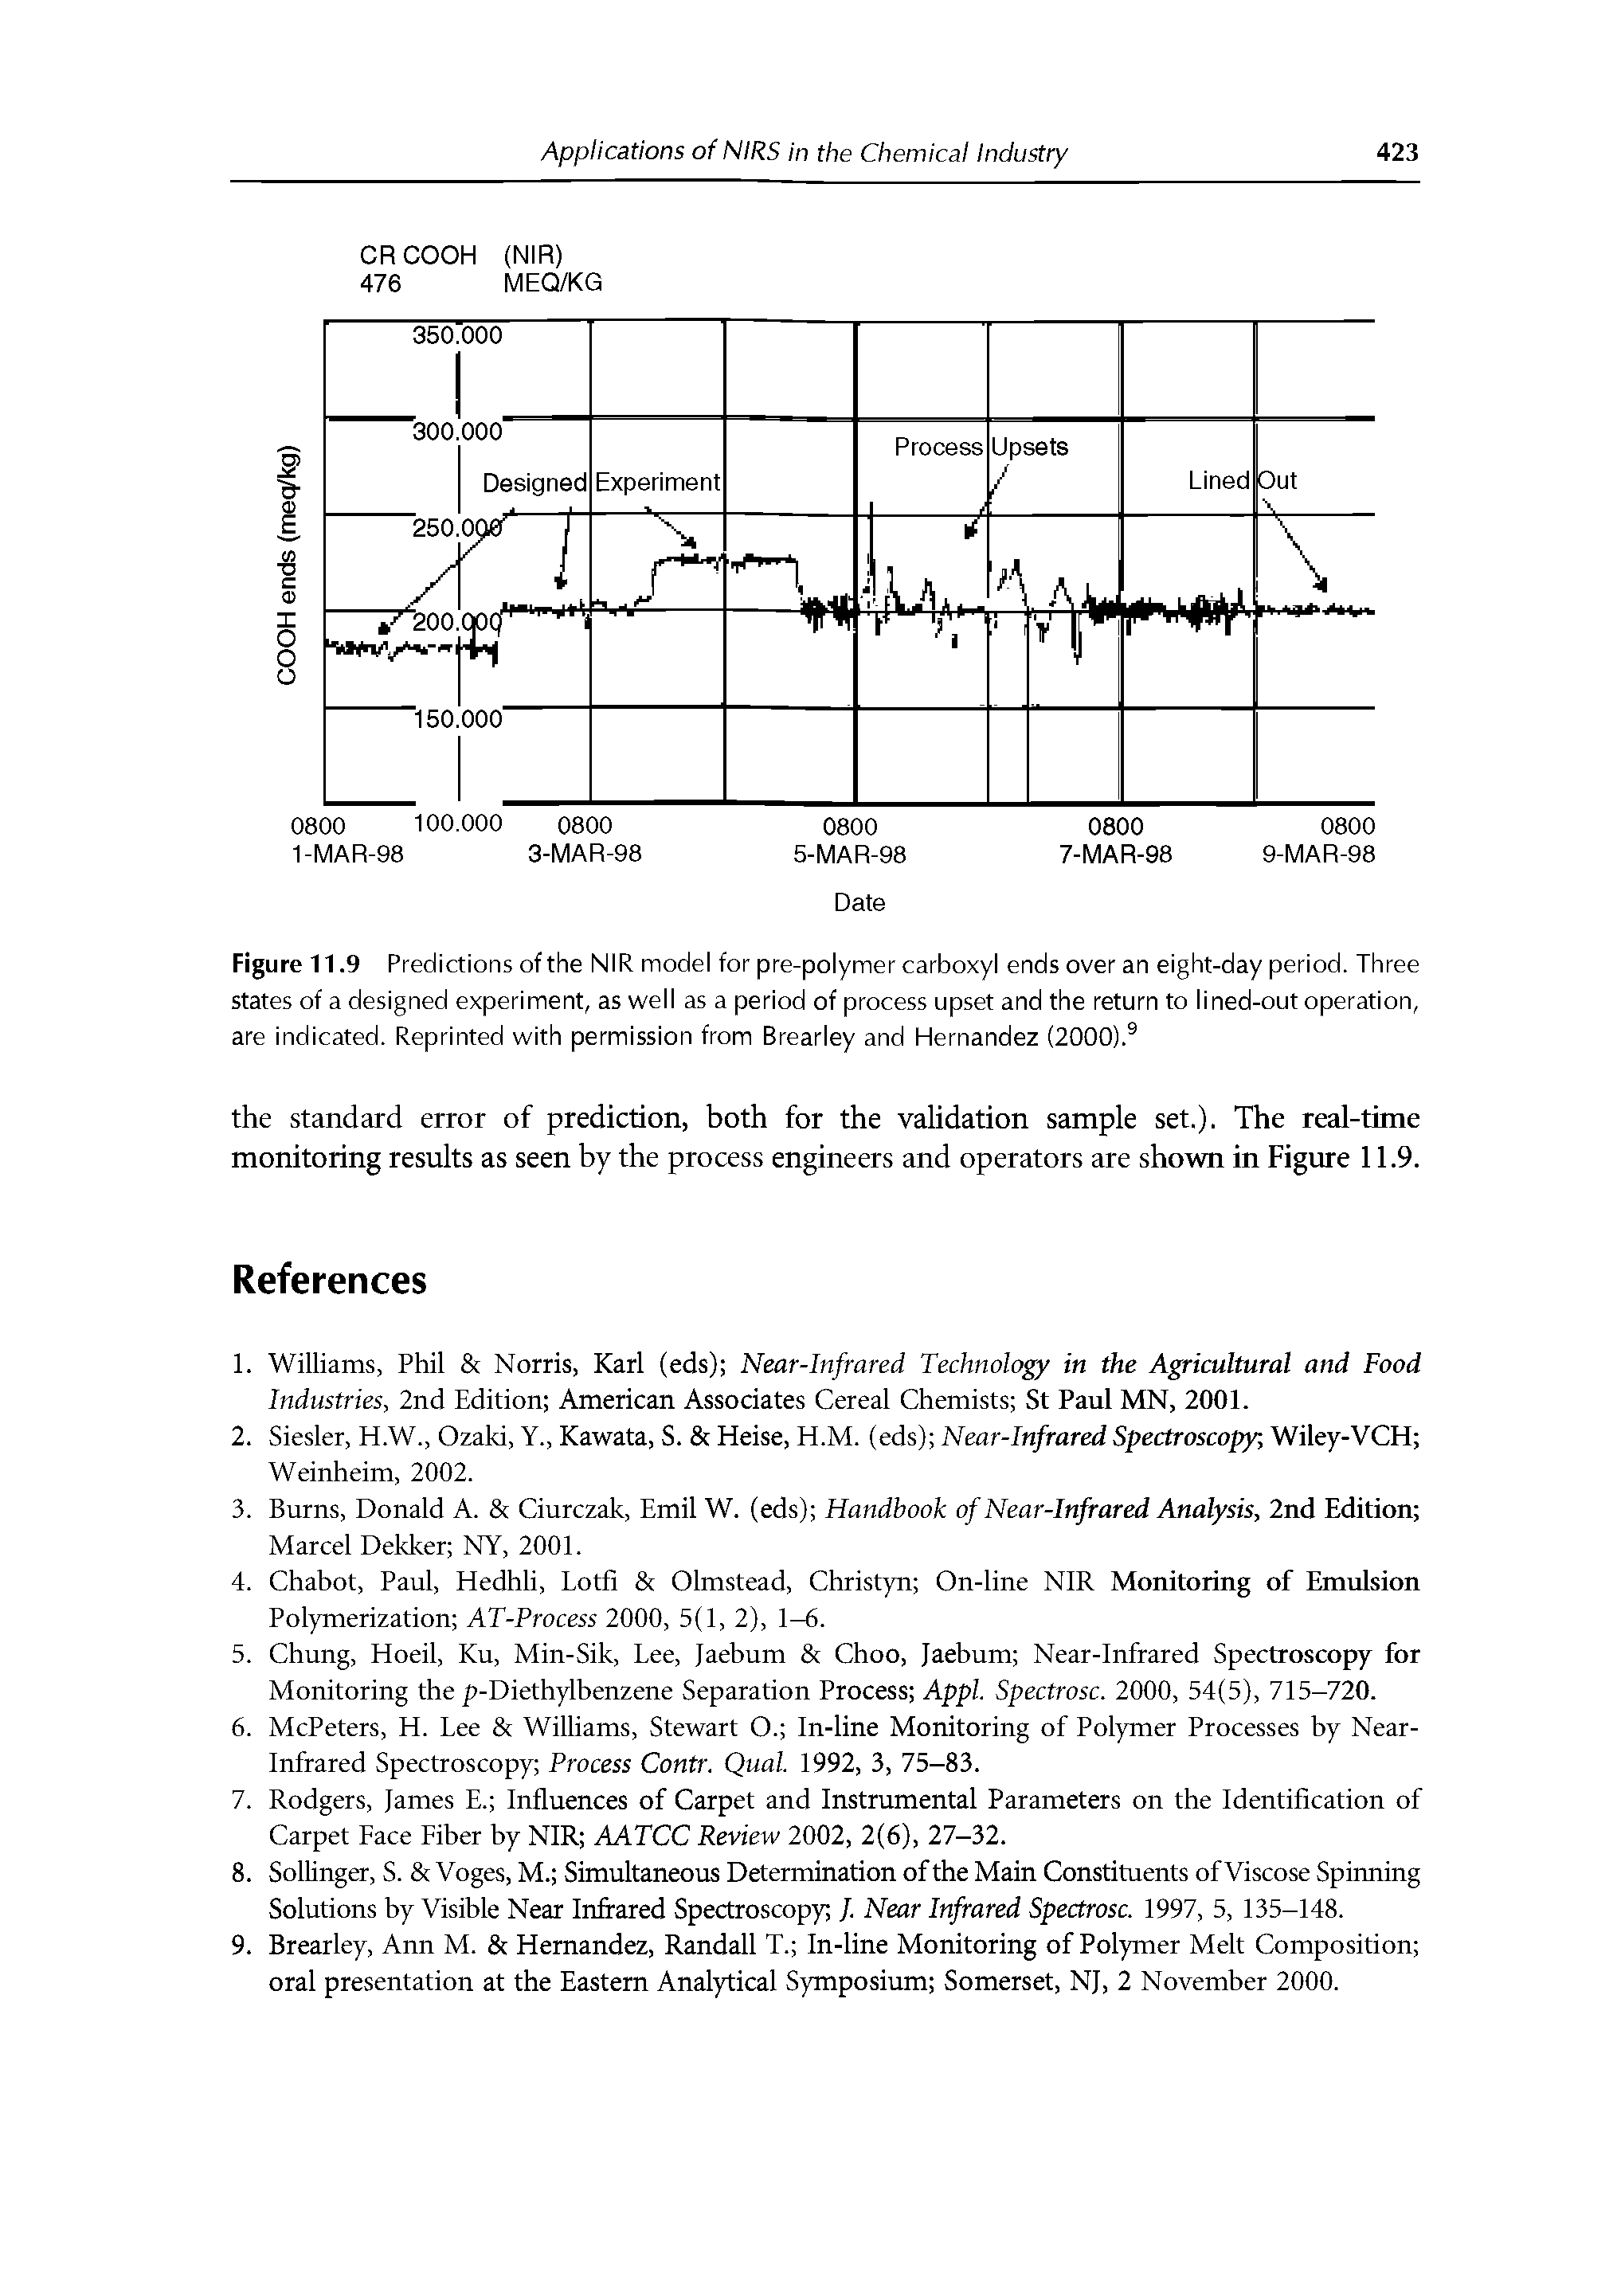 Figure 11.9 Predictions of the NIR model for pre-polymer carboxyl ends over an eight-day period. Three states of a designed experiment, as well as a period of process upset and the return to lined-out operation, are indicated. Reprinted with permission from Brearley and Hernandez (2000).9...